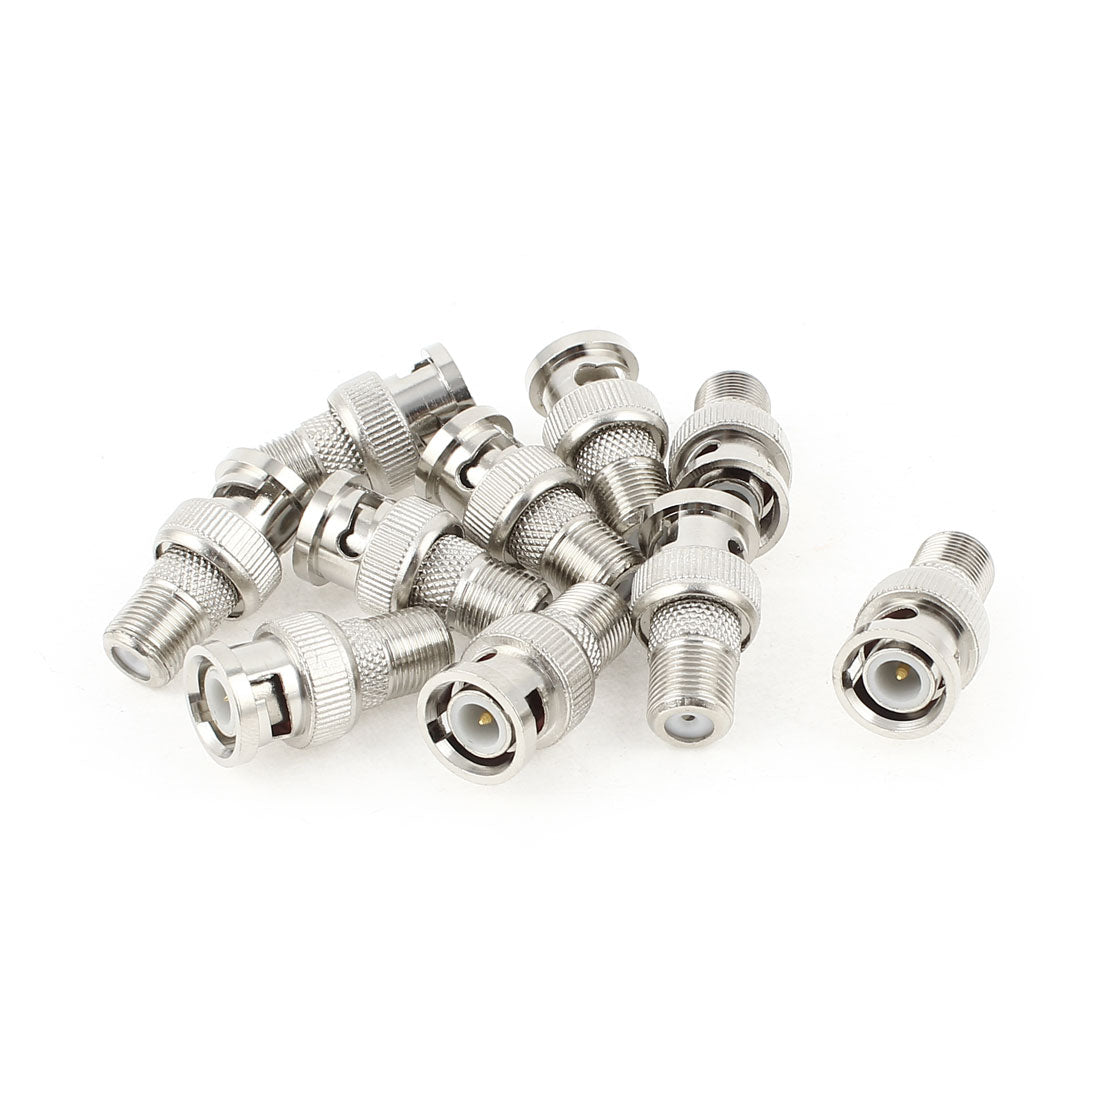 uxcell Uxcell 10PCS Metal BNC Male to F Female Jack RF Coaxial Adapter Connector